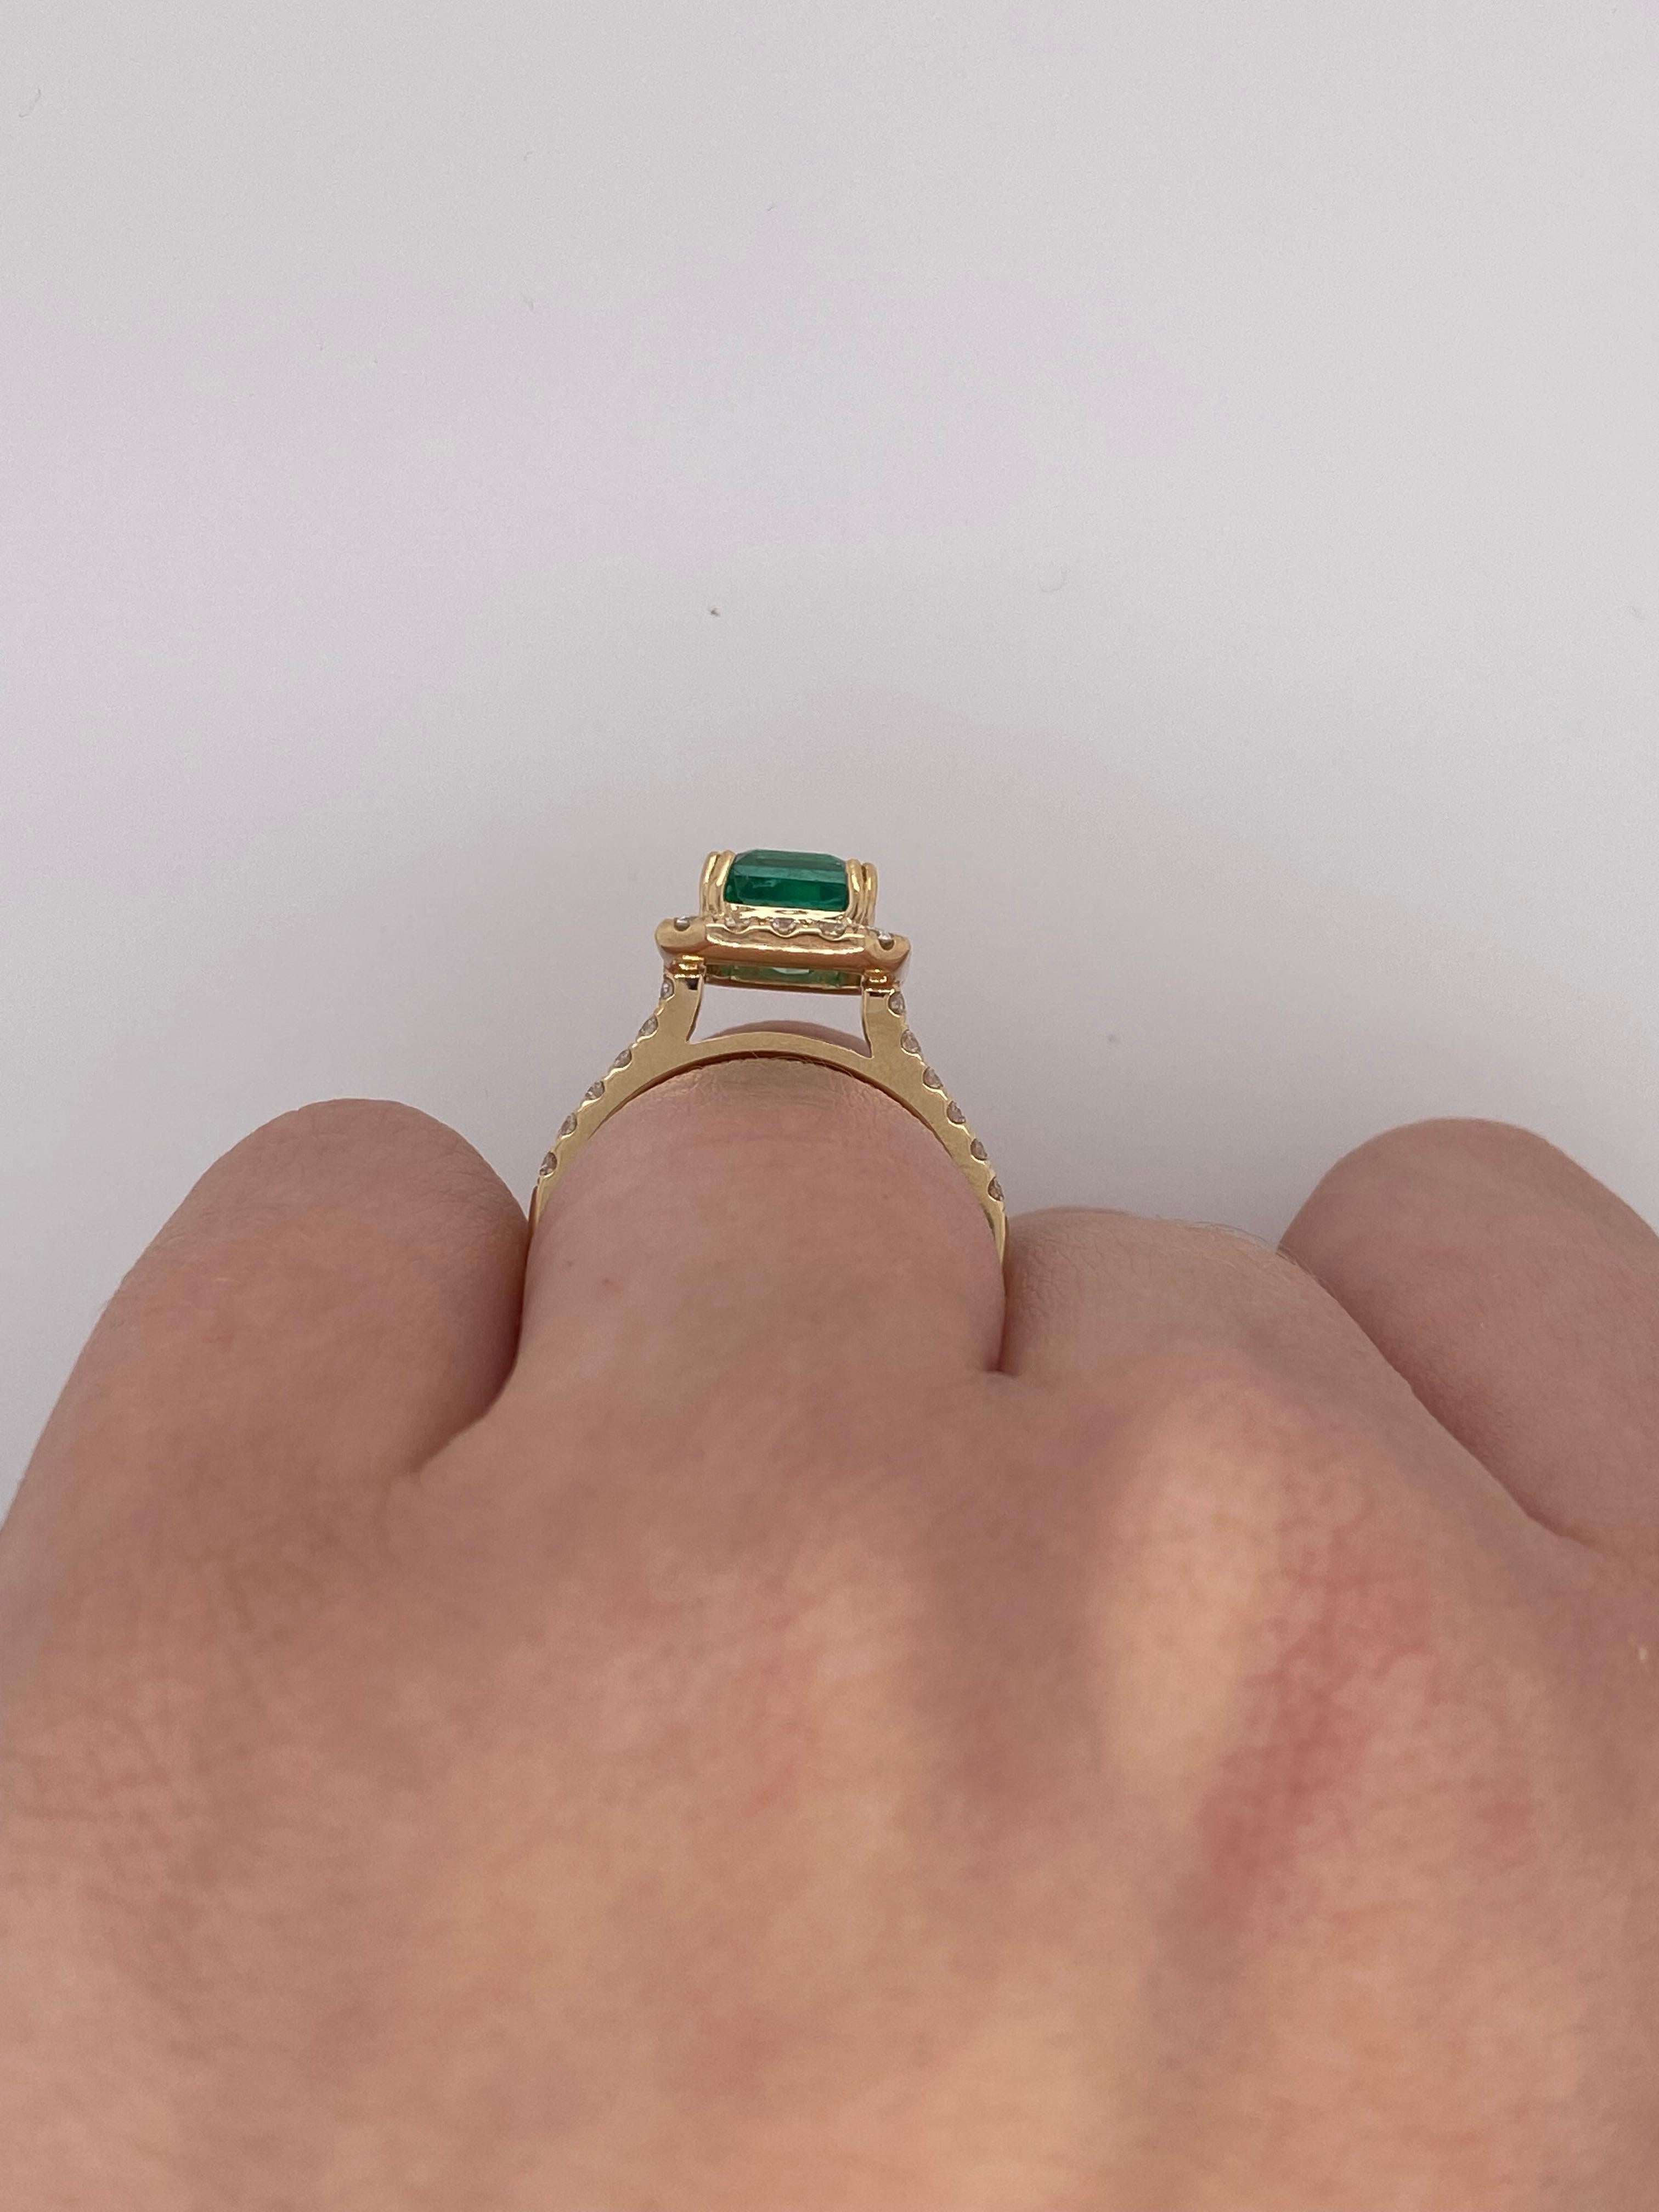 3 Carat Zambian Emerald And Diamond Halo Ring In 18k Yellow Gold In New Condition For Sale In Houston, TX